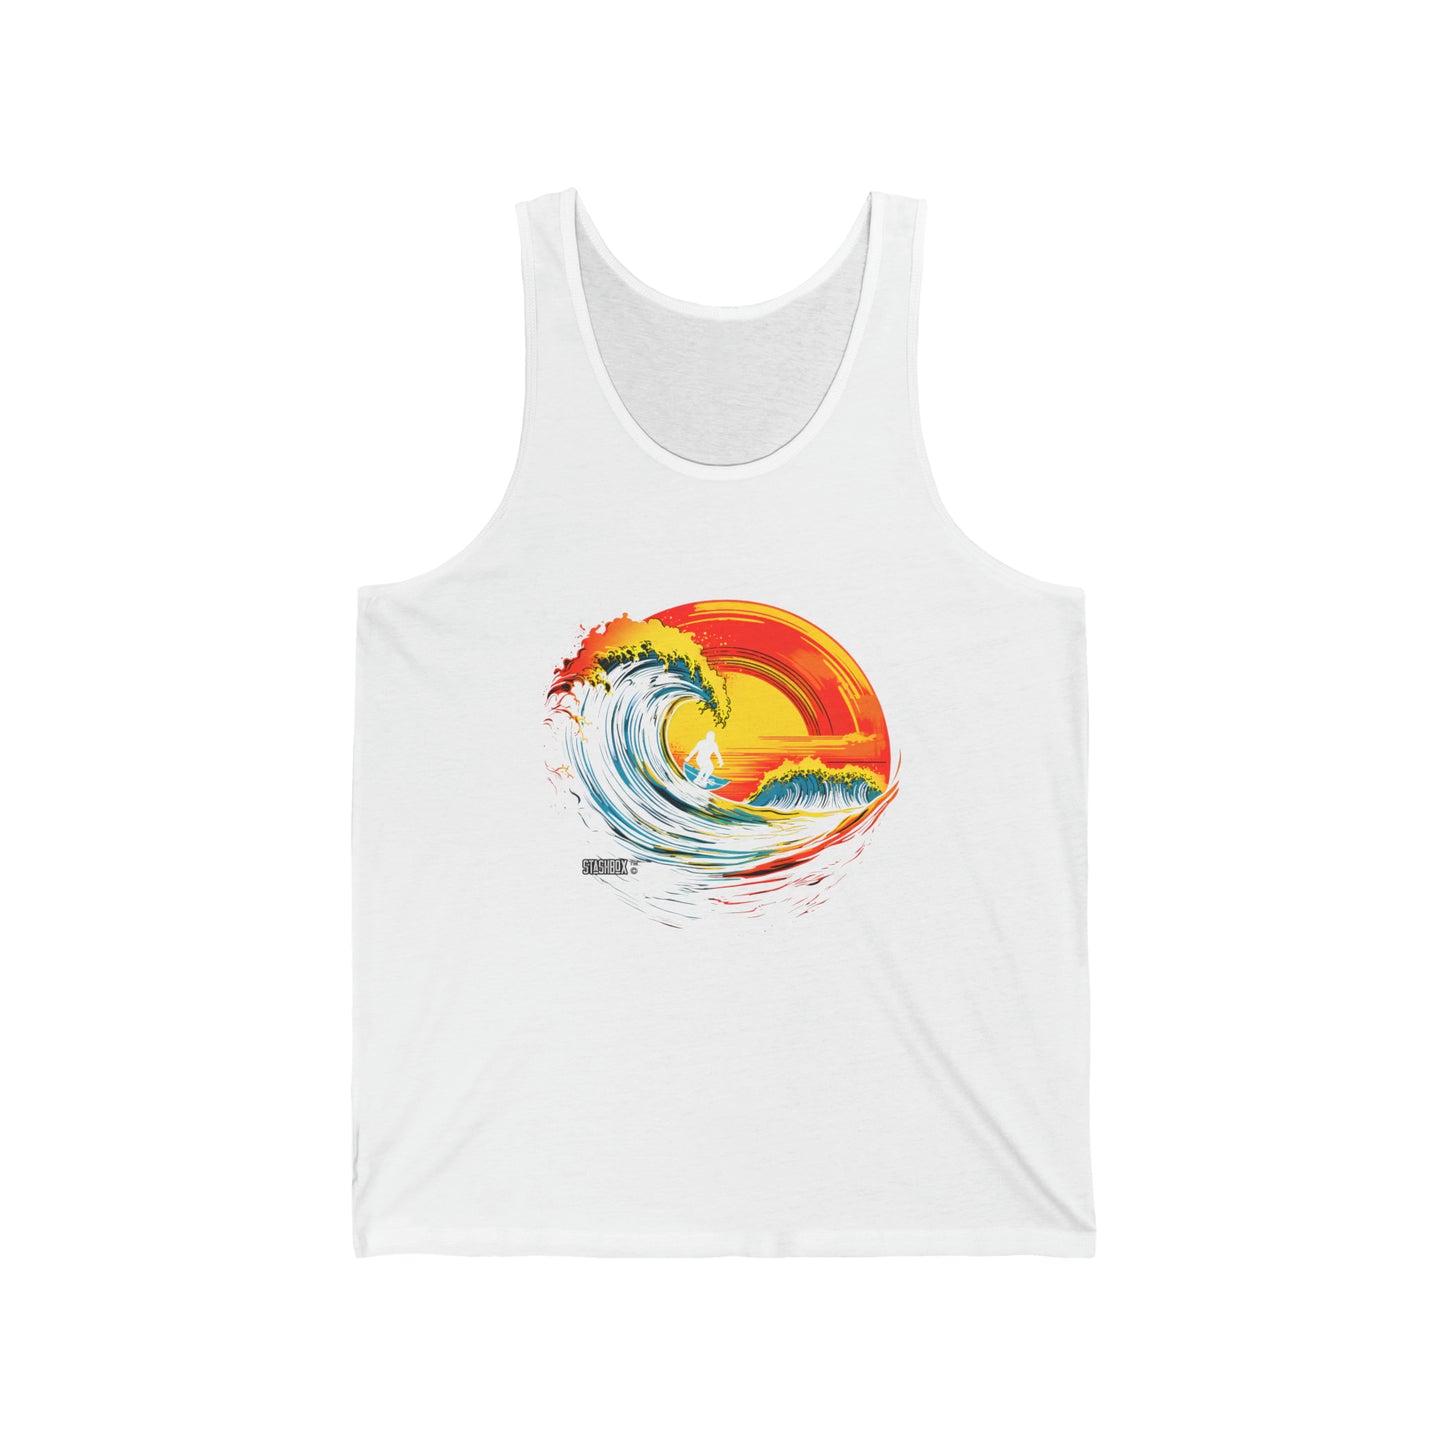 Unisex Jersey Tank Top Classic Surreal Surfer and Surfboard 66